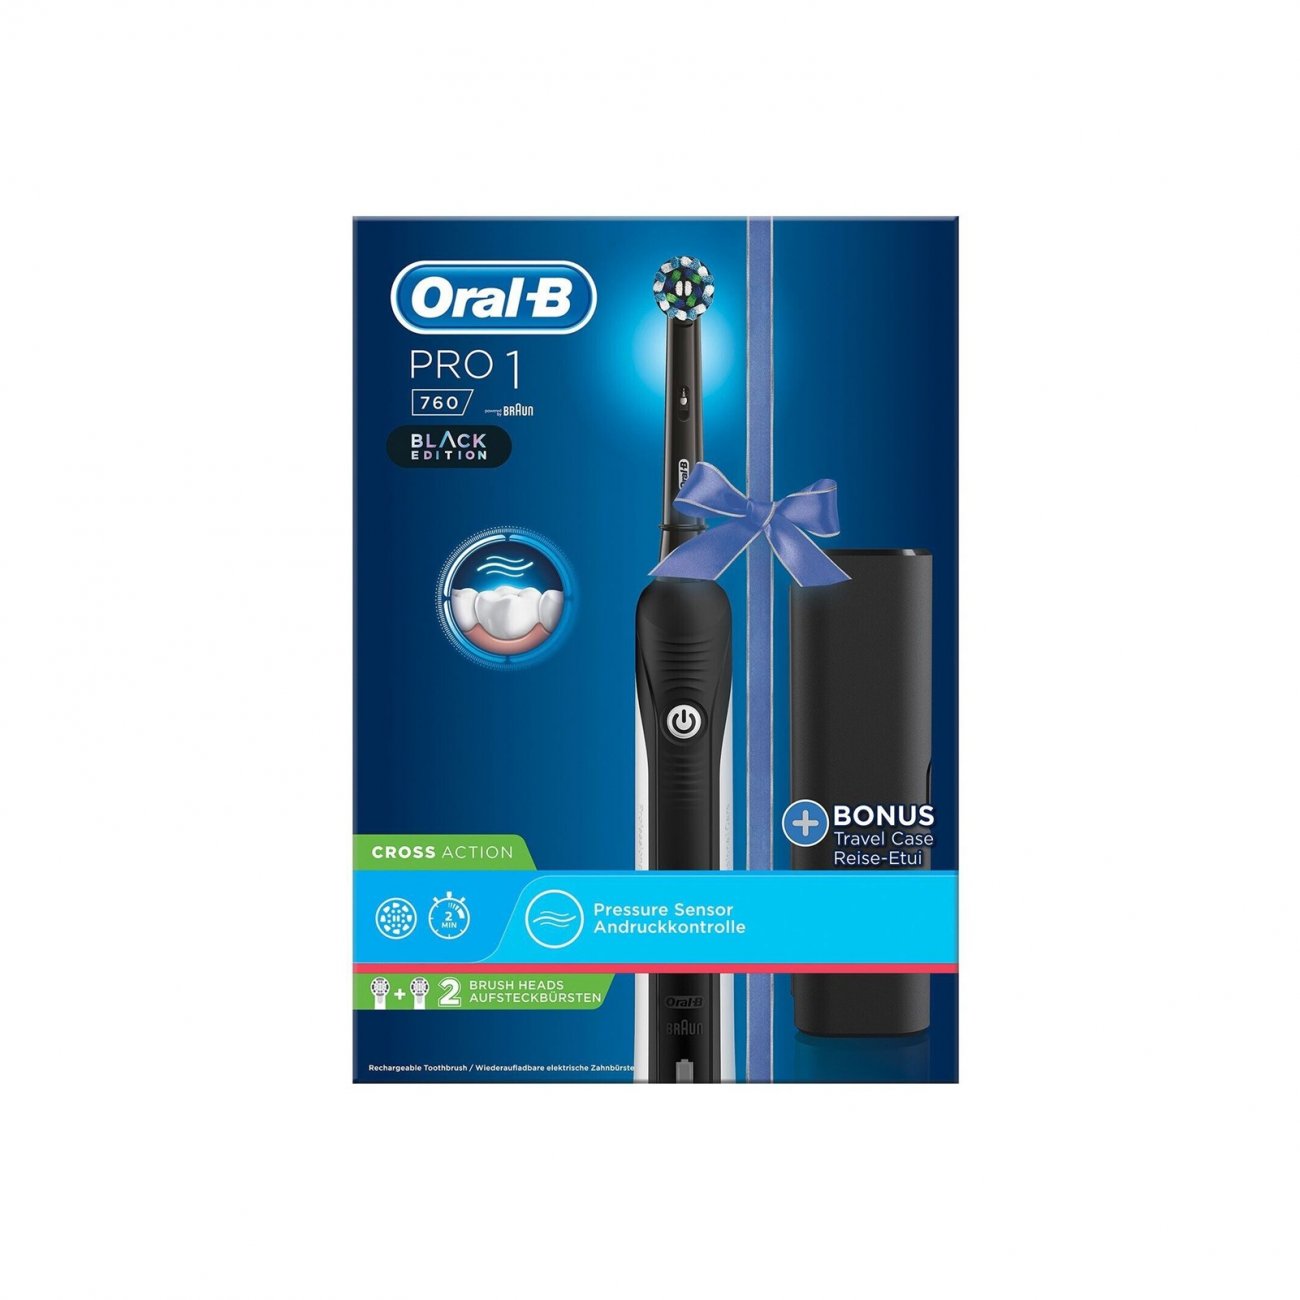 Buy Oral-B Pro 1 760 Edition Cross Action Electric Toothbrush ·